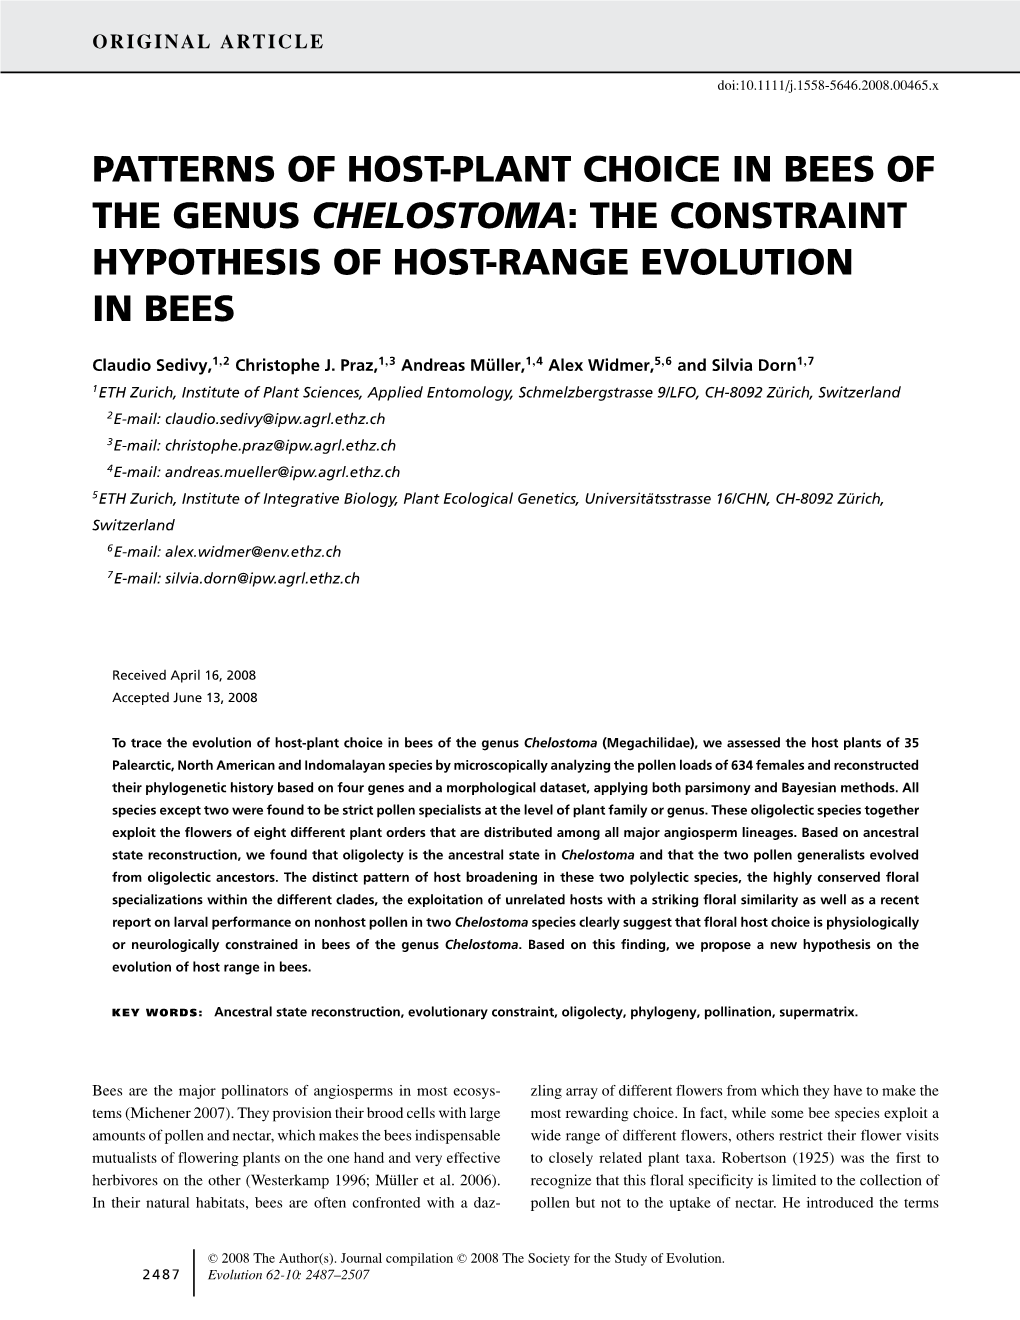 Chelostoma: the Constraint Hypothesis of Host-Range Evolution in Bees